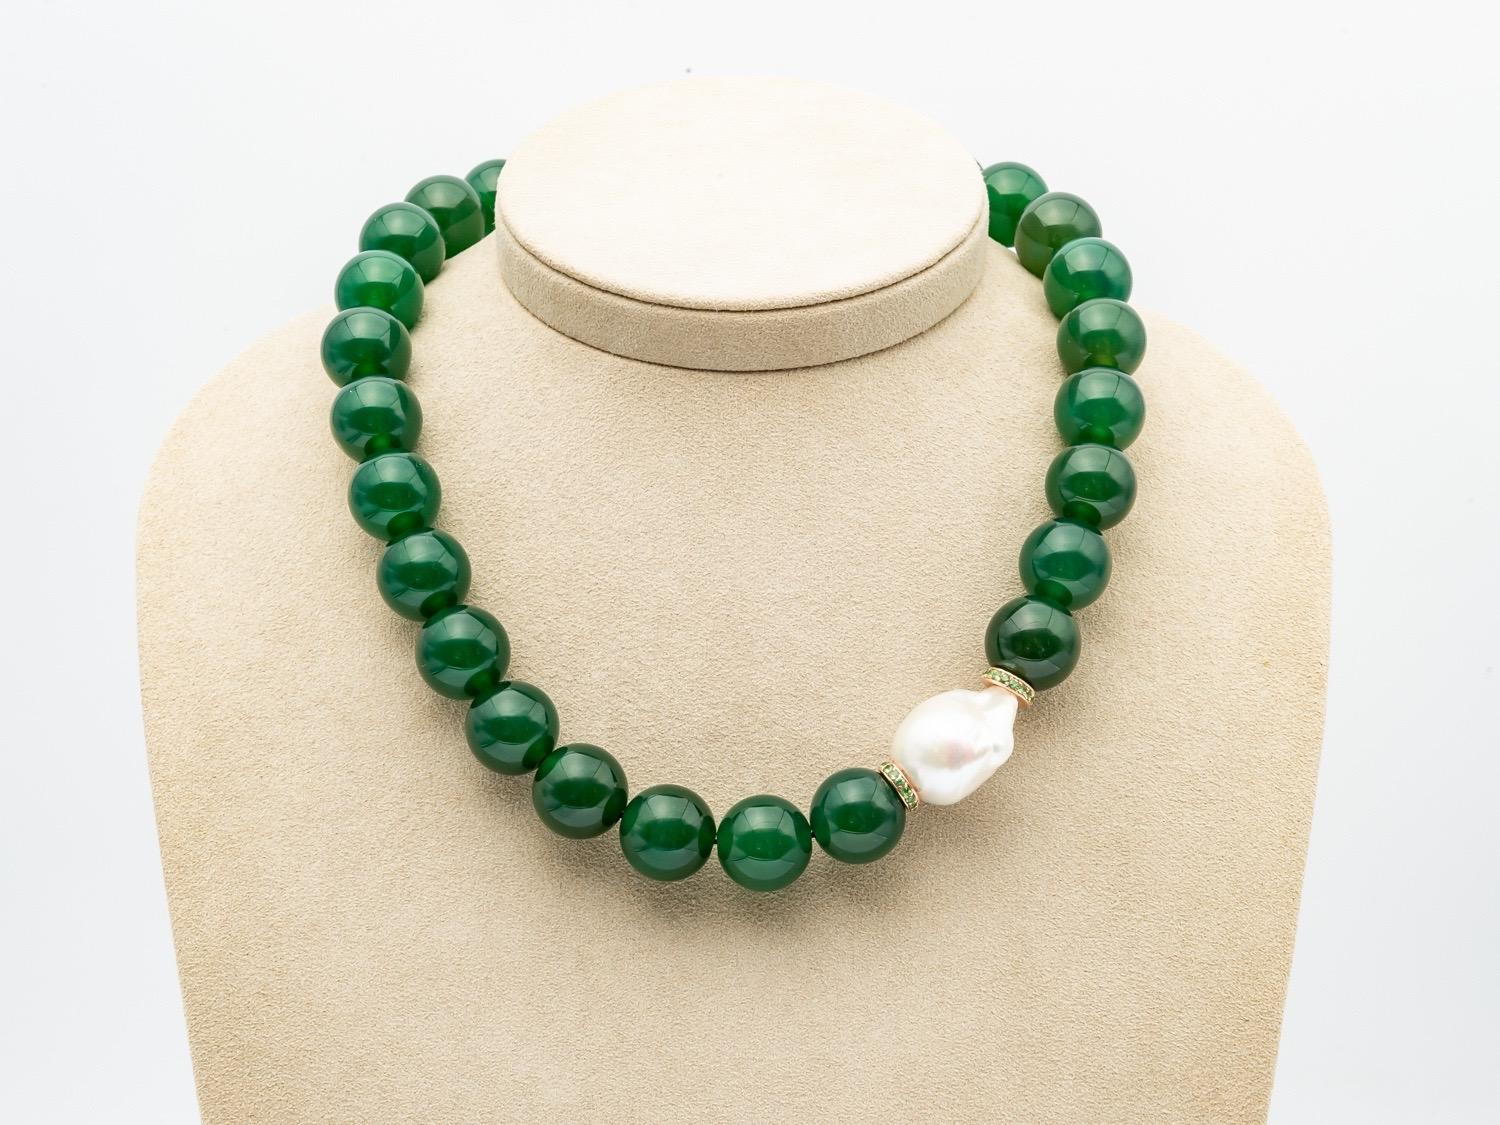 Women's Green Agate Beads Necklace Accompanied by Baroque Pearl and 0.32 Ct of Tsavorite